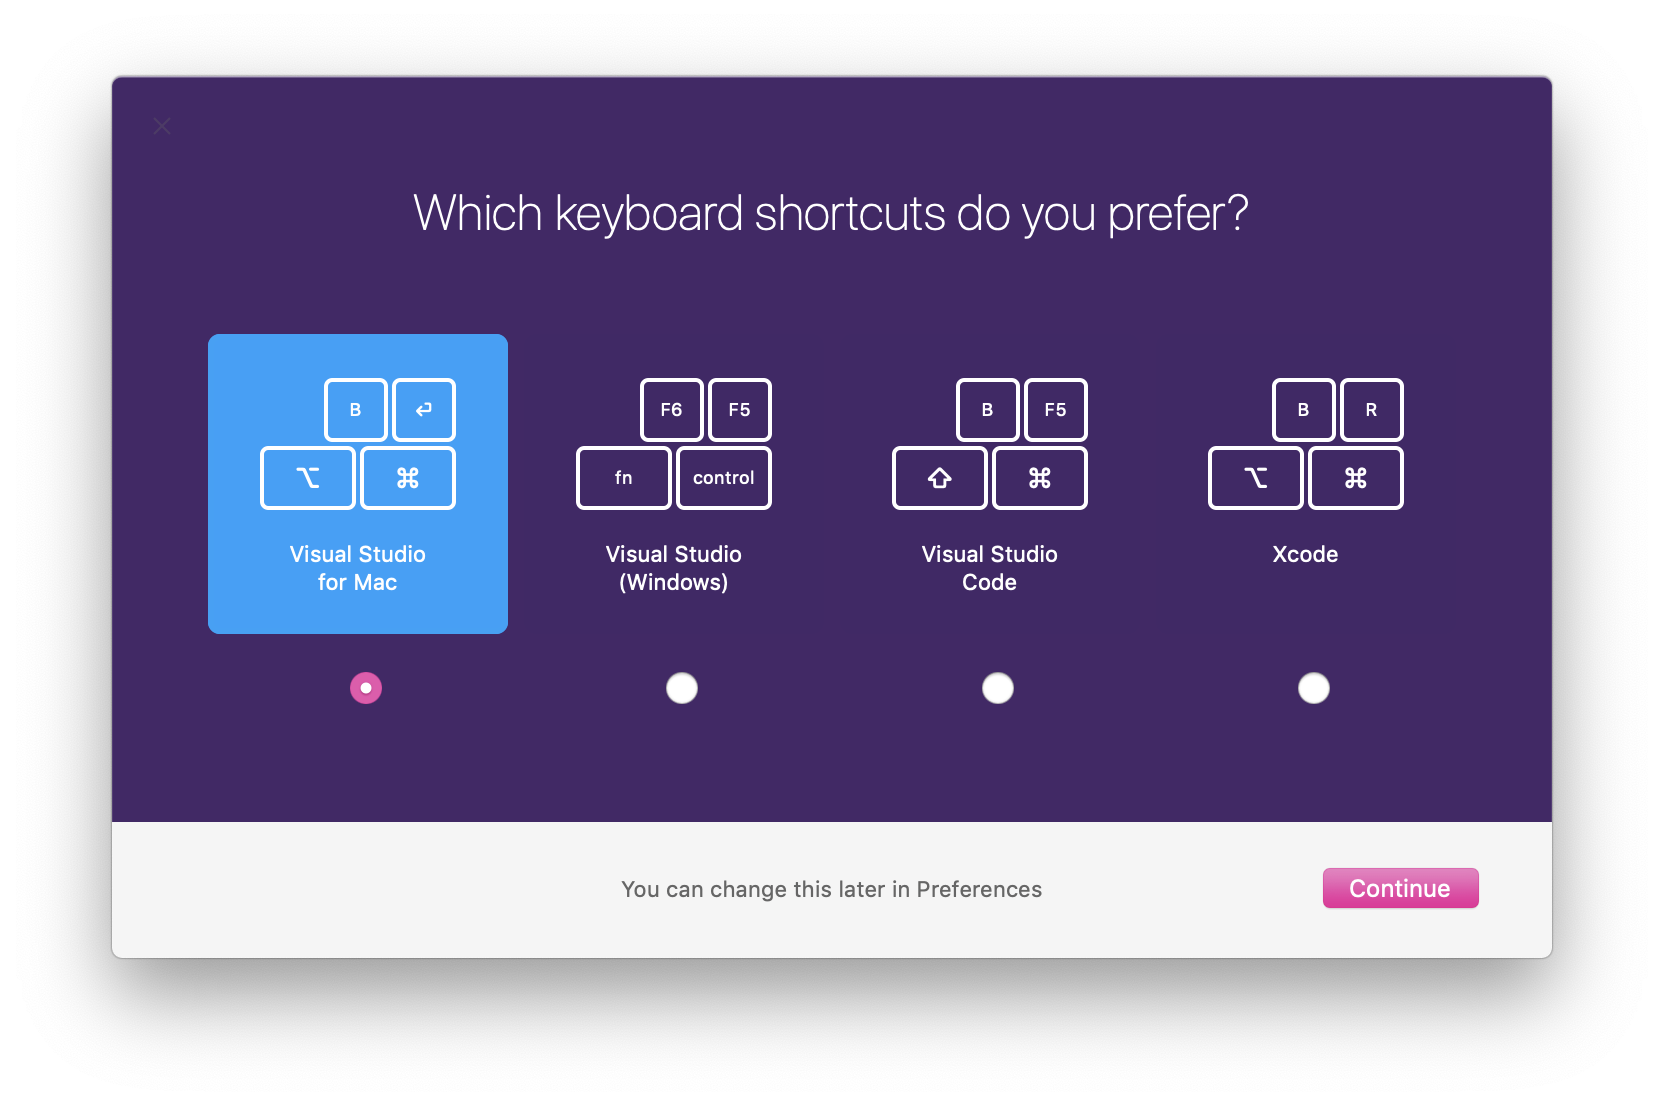 Select your favorite keyboard shortcuts